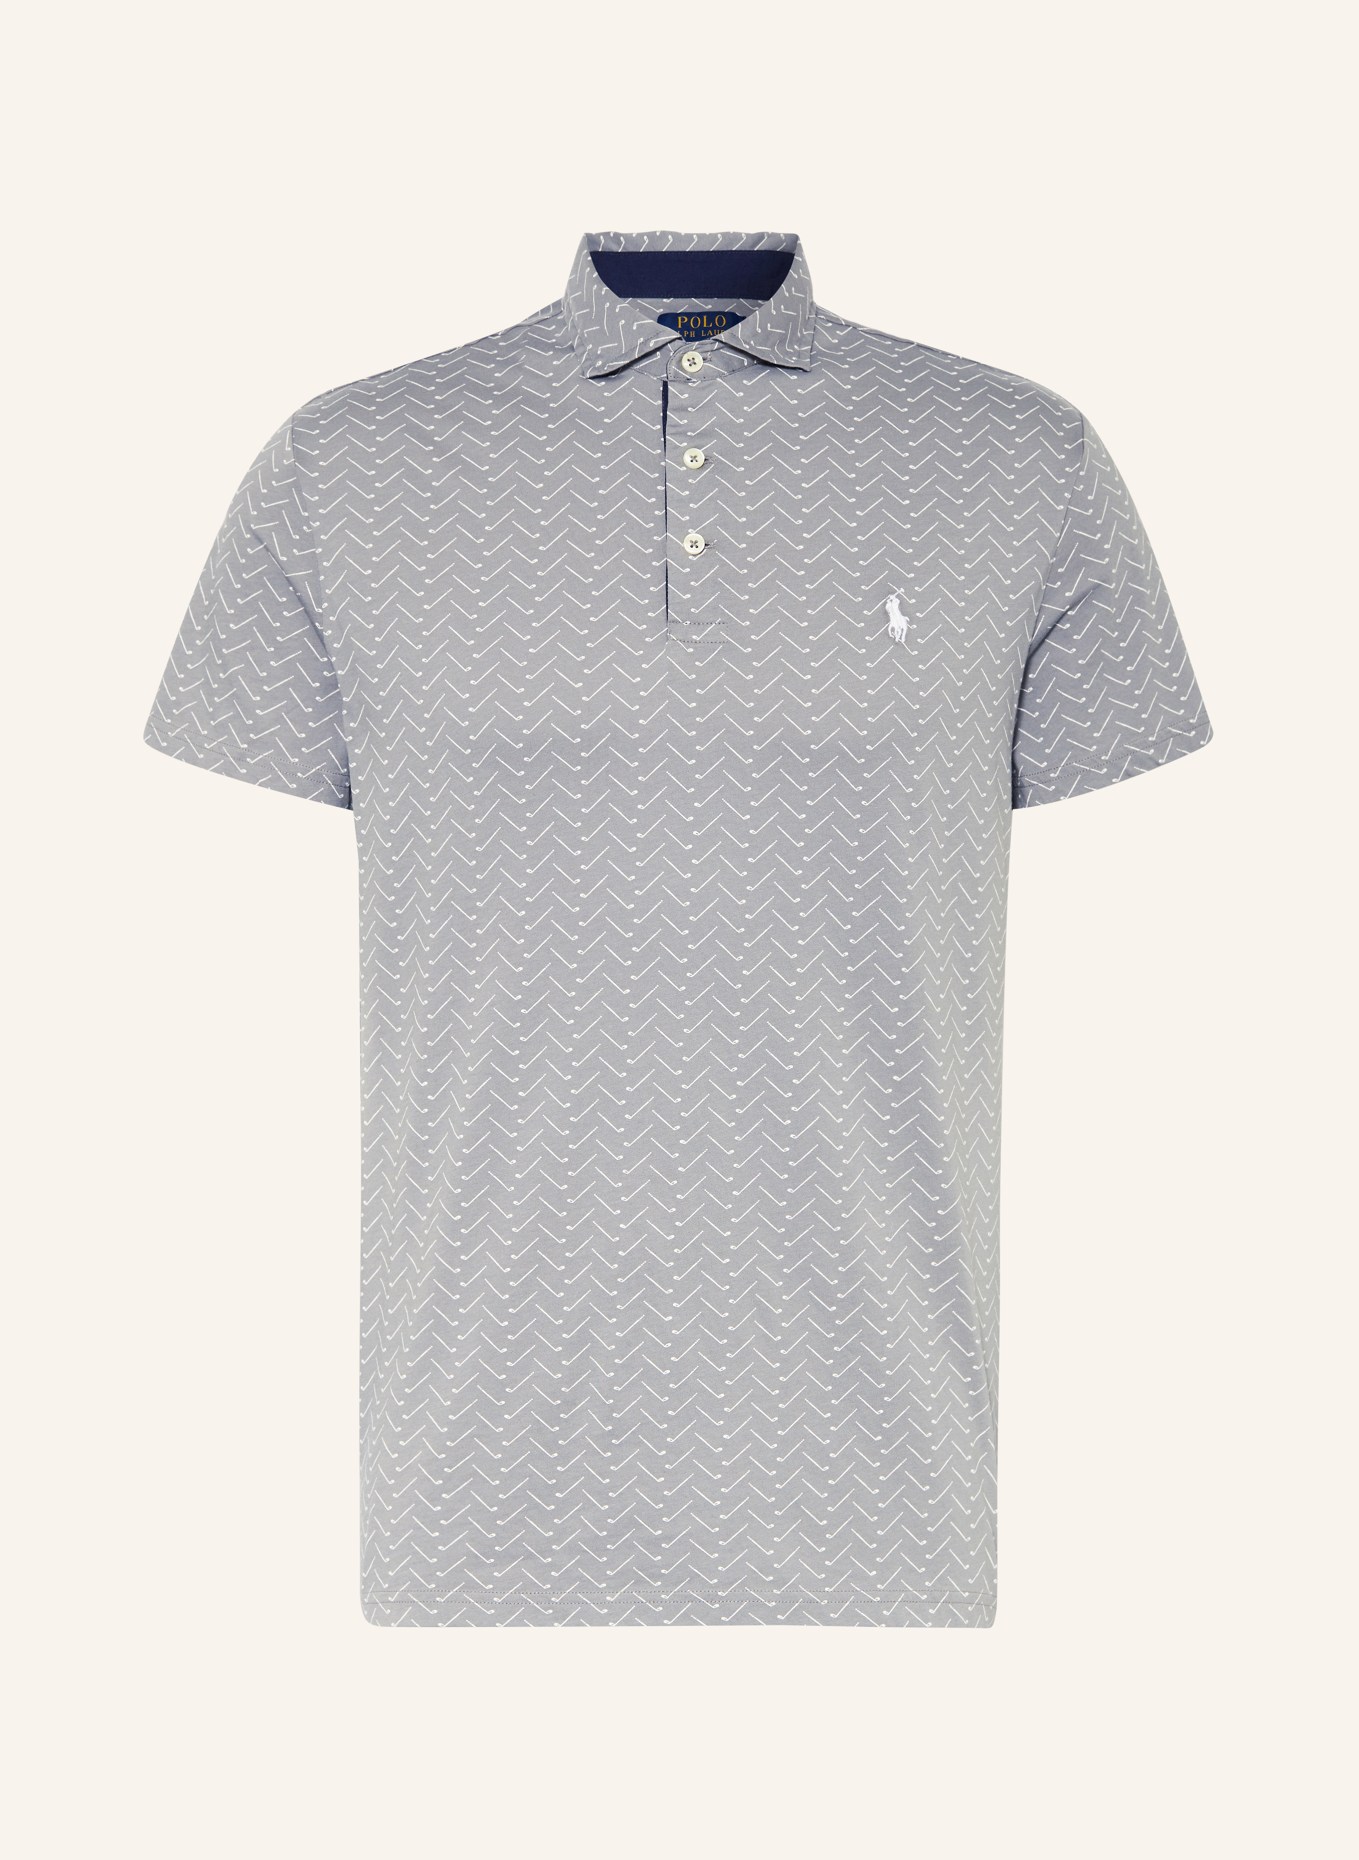 POLO GOLF RALPH LAUREN Jersey polo shirt tailored fit, Color: GRAY (Image 1)